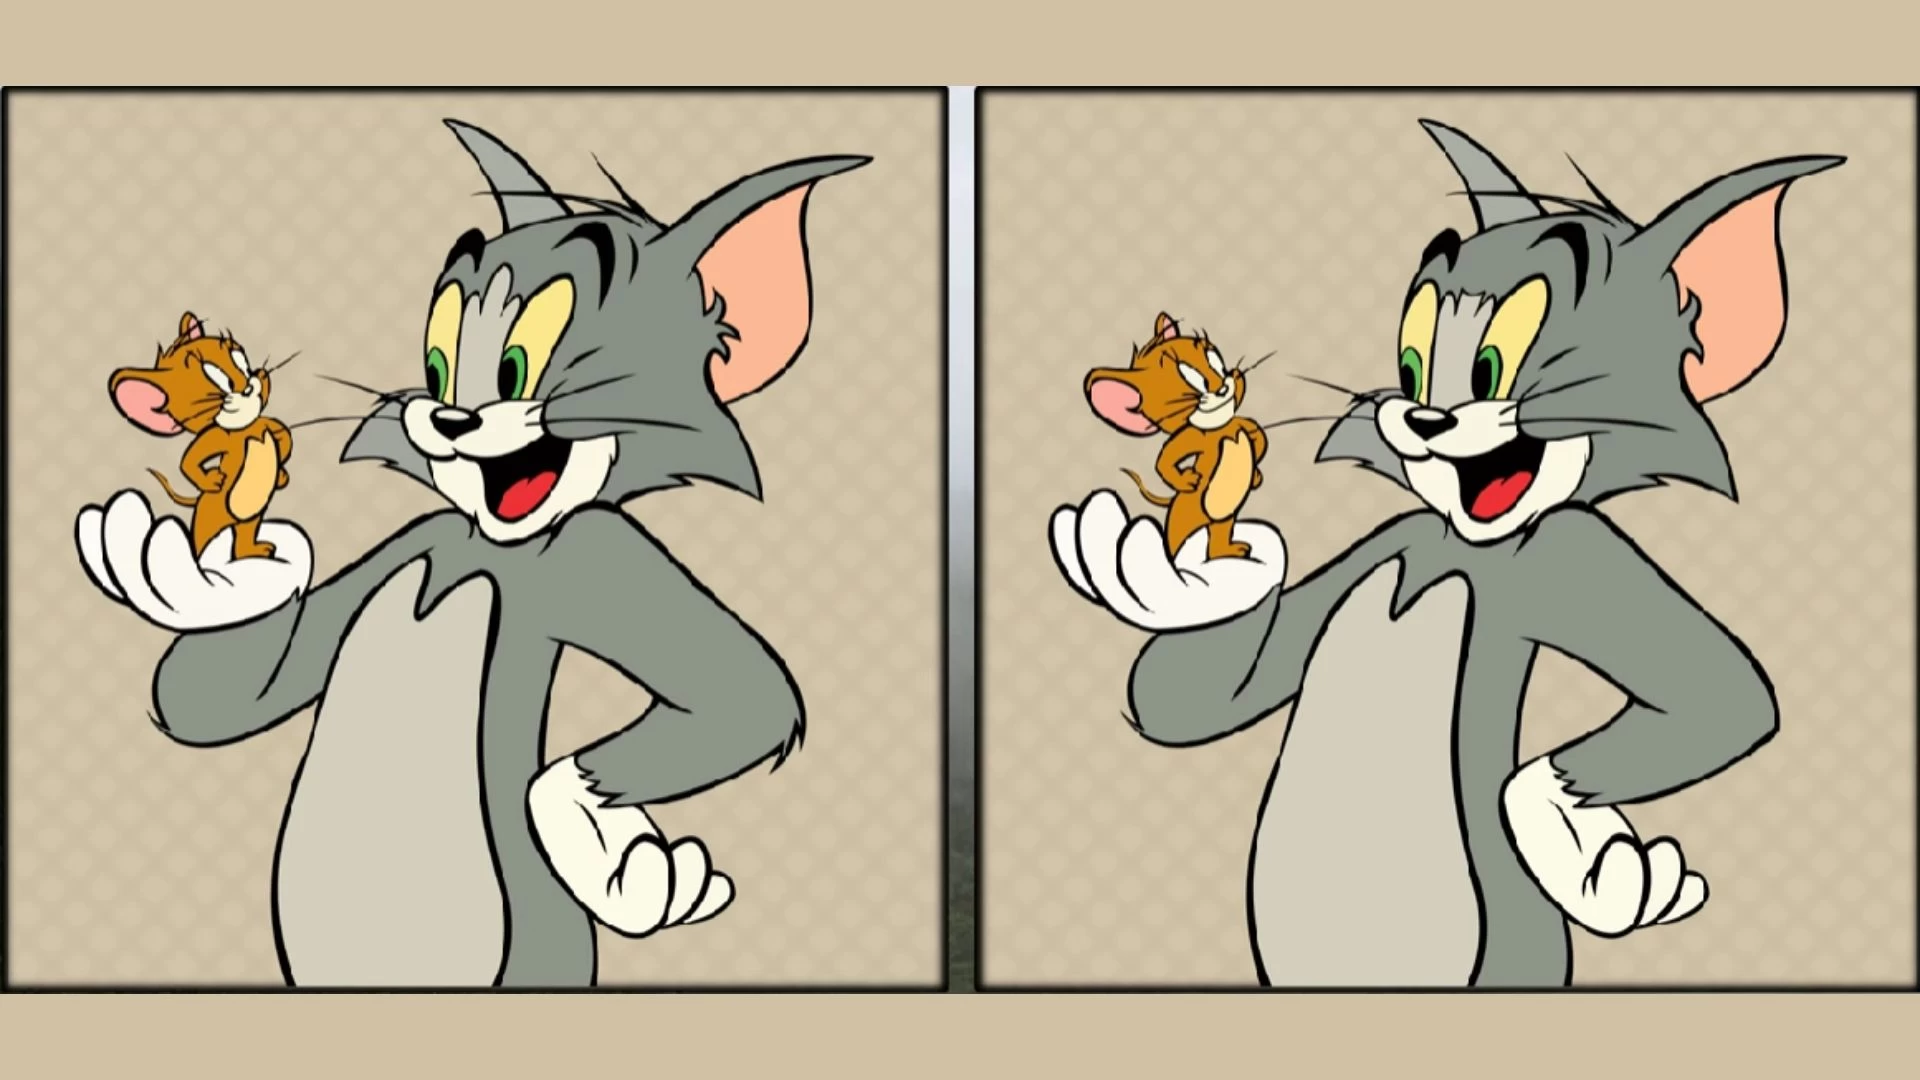 Only the most observant can spot 5 differences between the Tom and Jerry pictures in 20 seconds